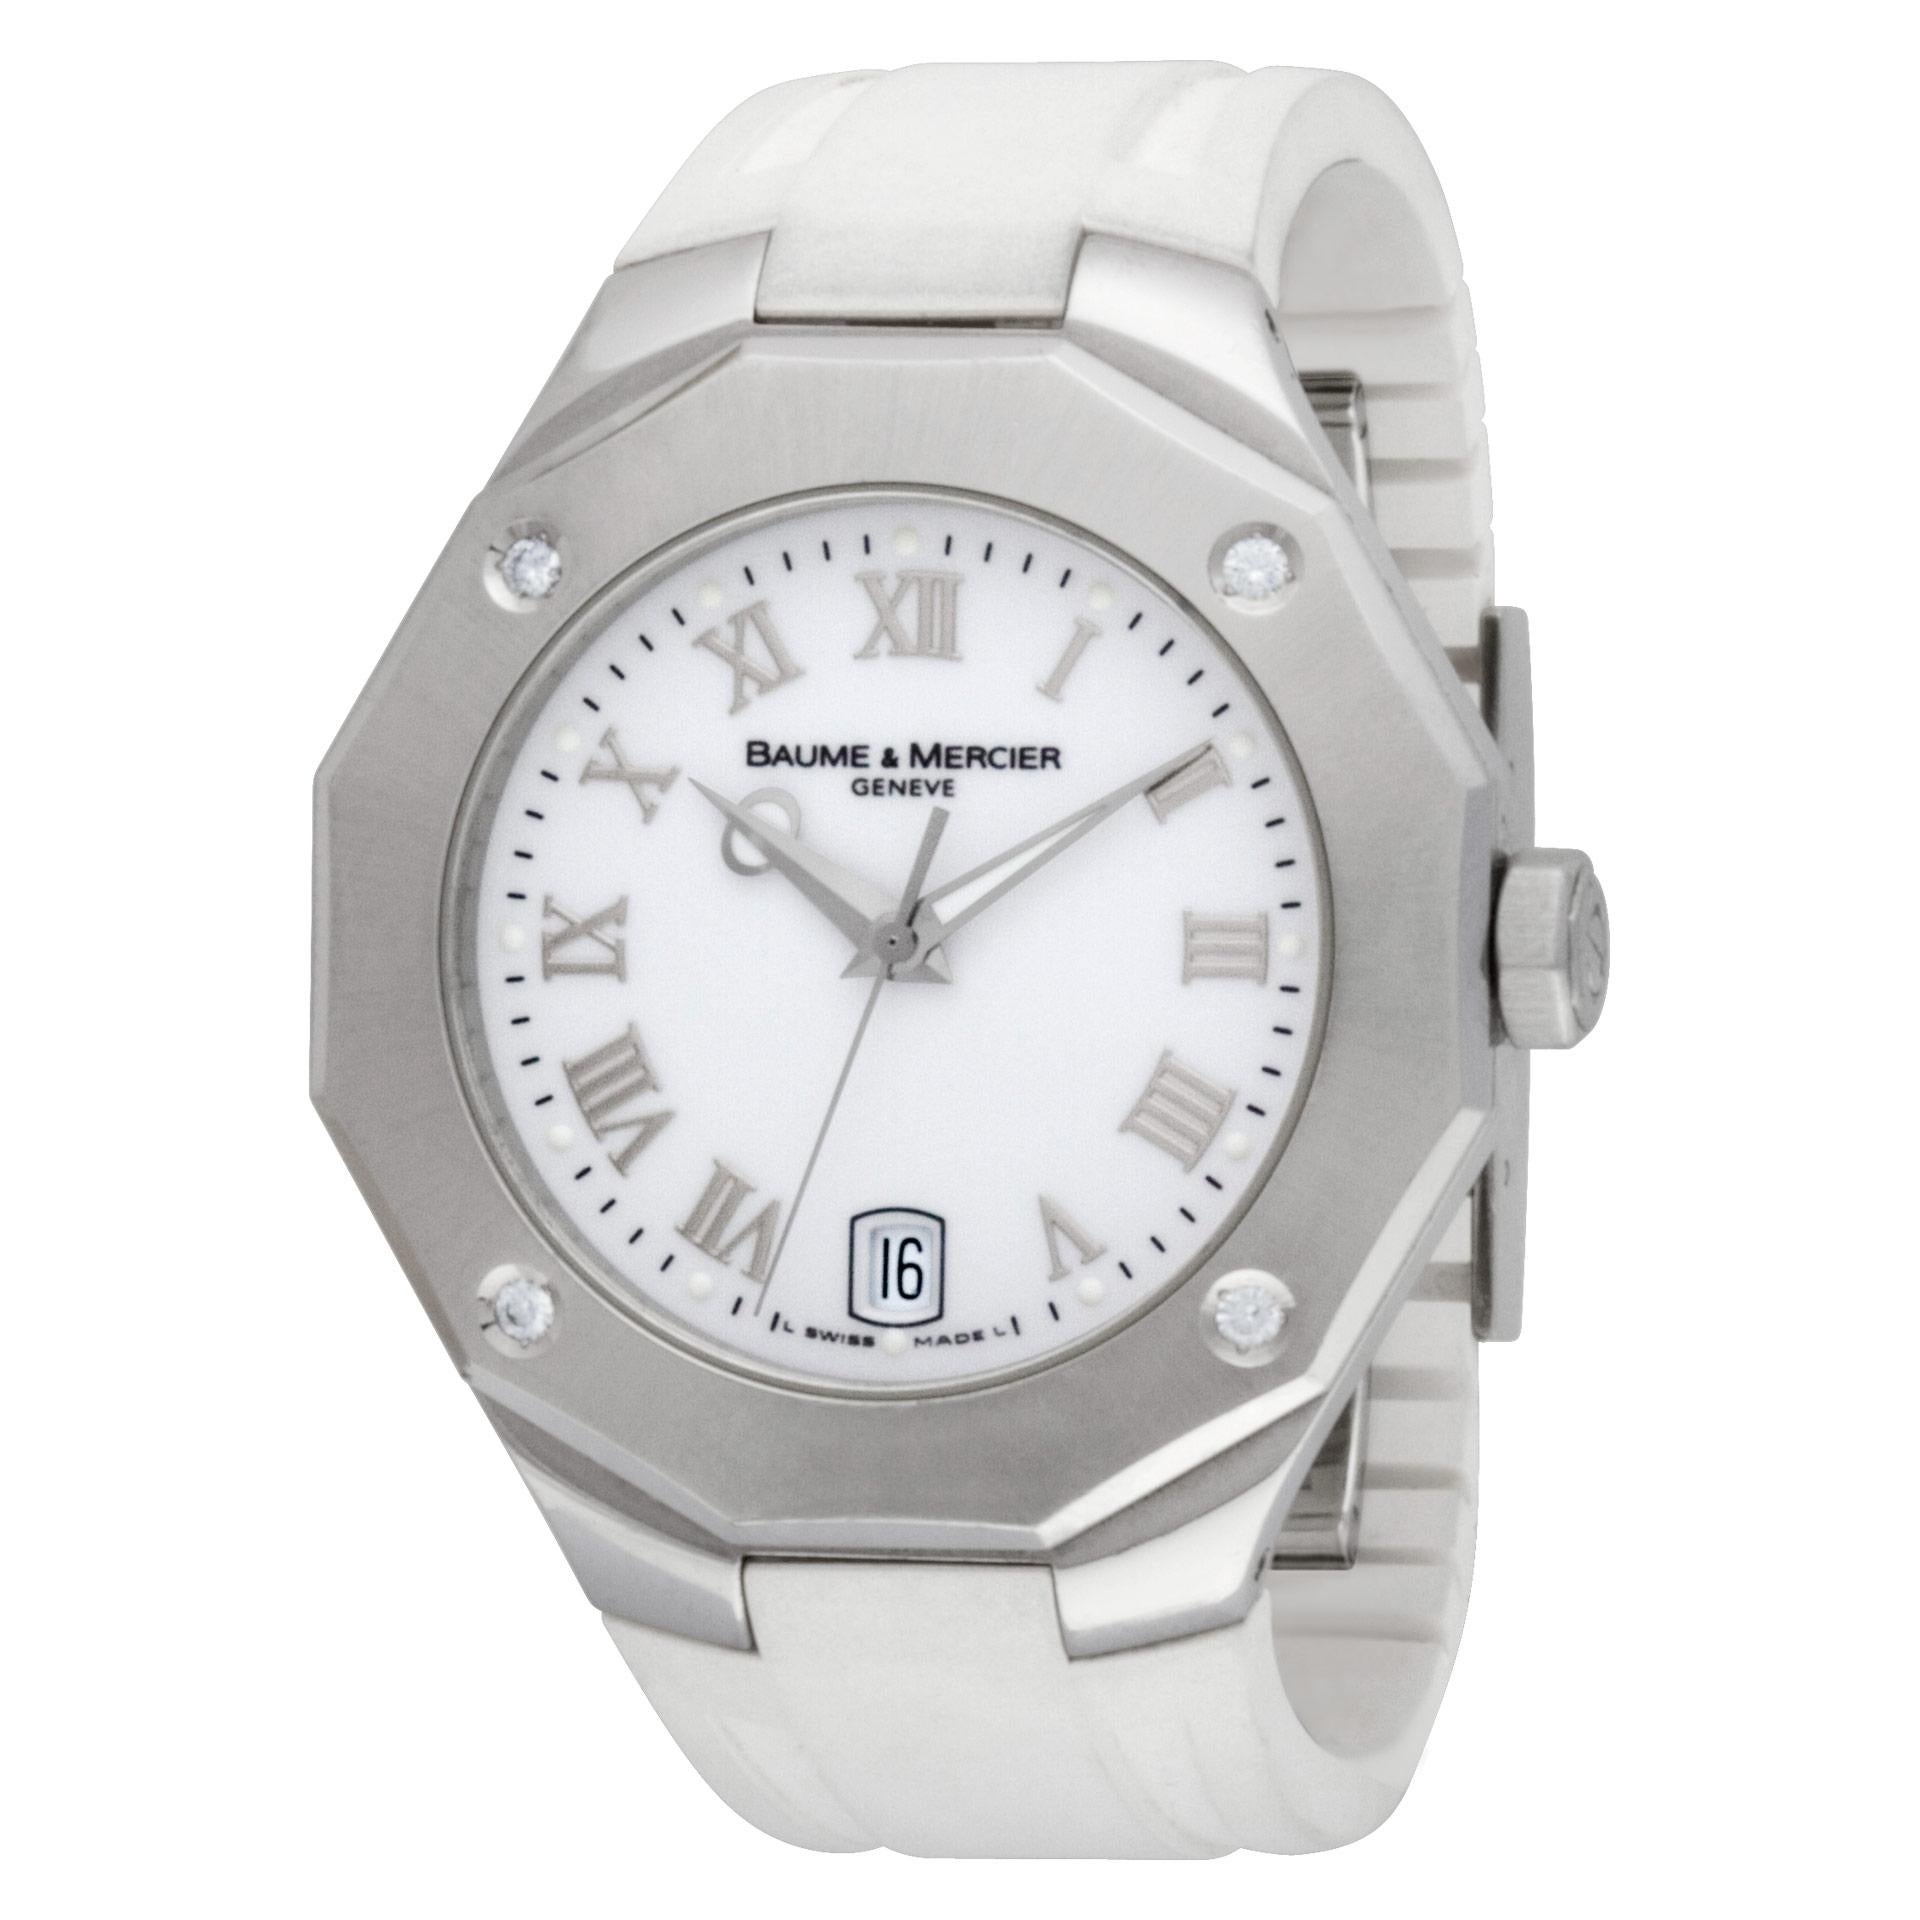 Ladies Baume & Mercier Riviera in stainless steel on the original rubber strap. Quartz w/ date. Four diamonds on the bezel. 38 mm case size. Ref N4626500. Circa 2000s. Fine Pre-owned Baume & Mercier Watch.

Certified preowned Classic Baume & Mercier